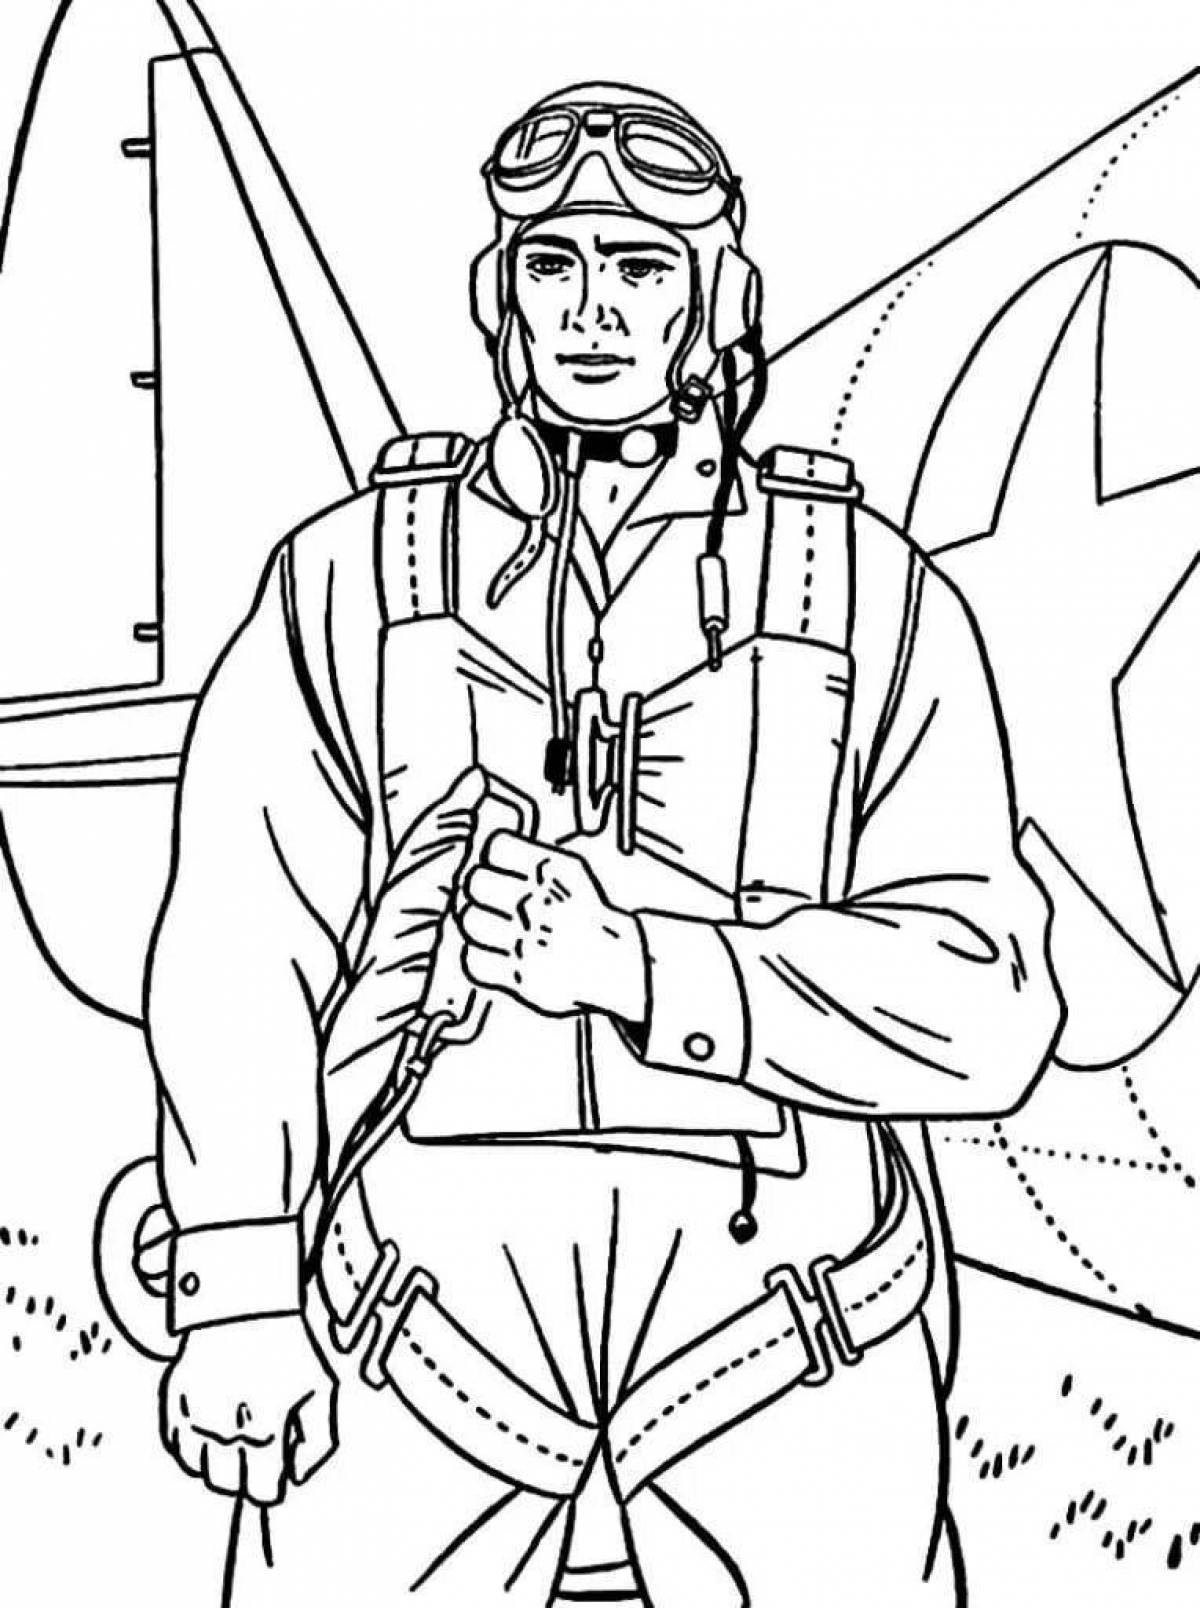 Coloring page joyful soldier page February 23